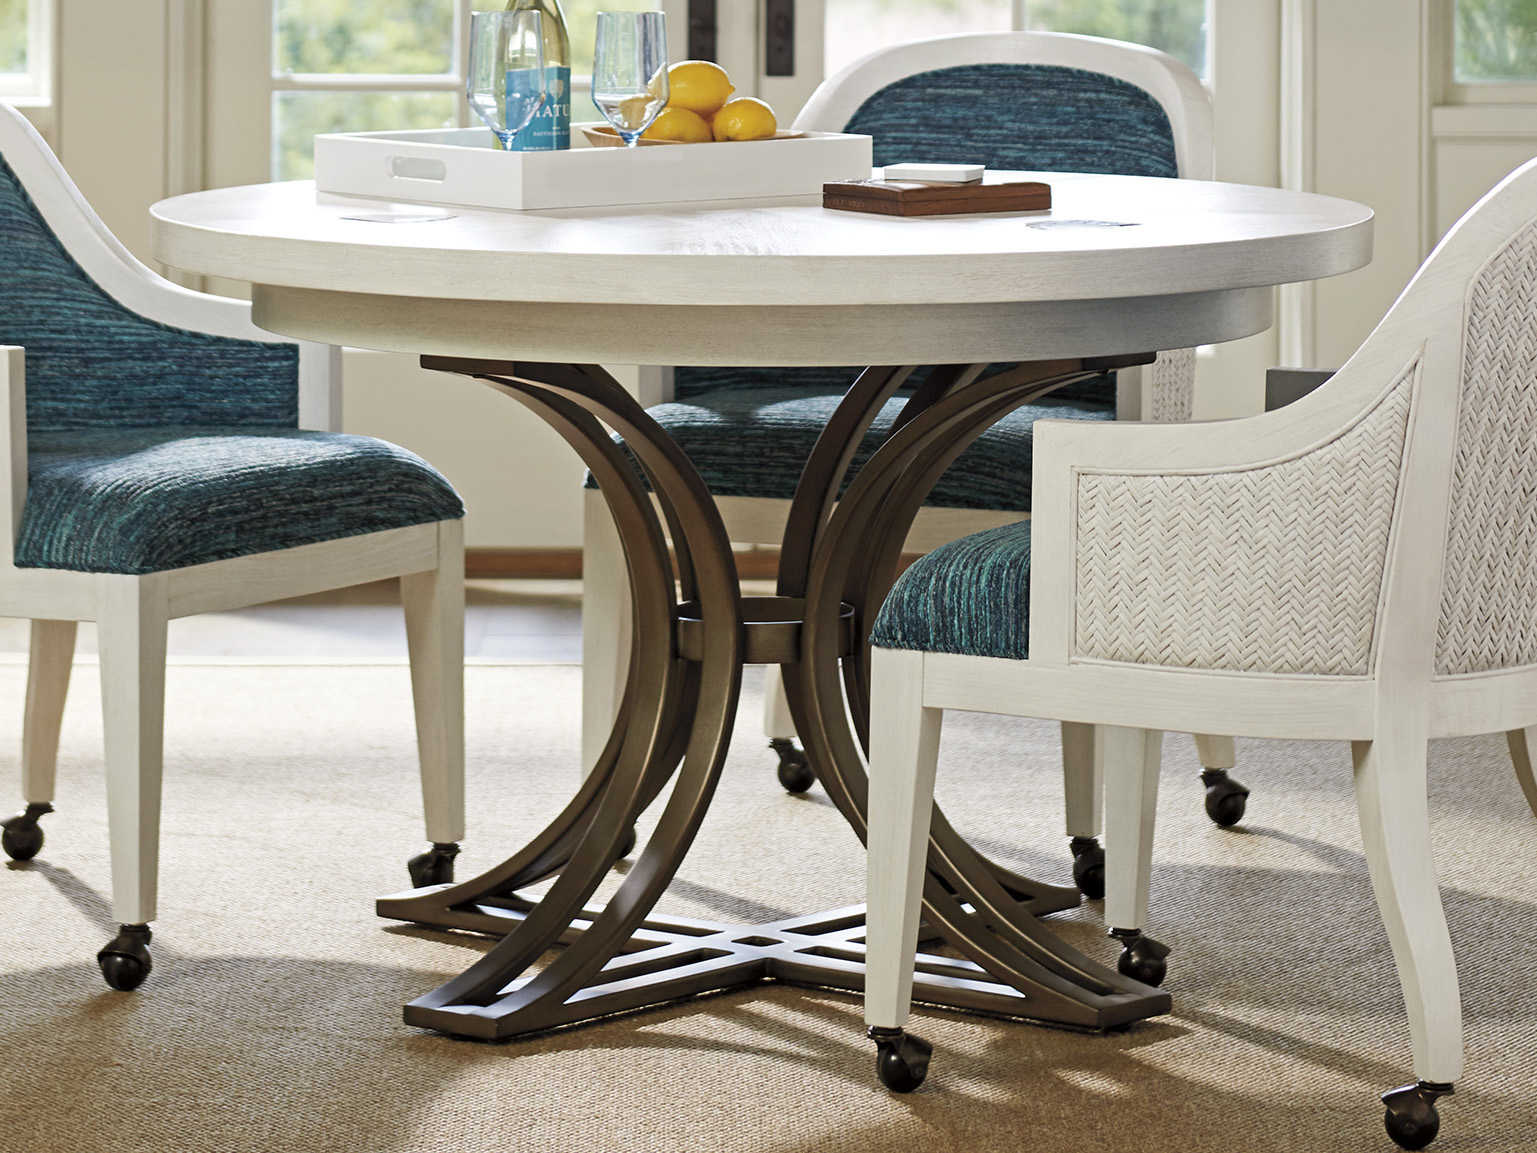 Tommy Bahama Style Dining Room Tables